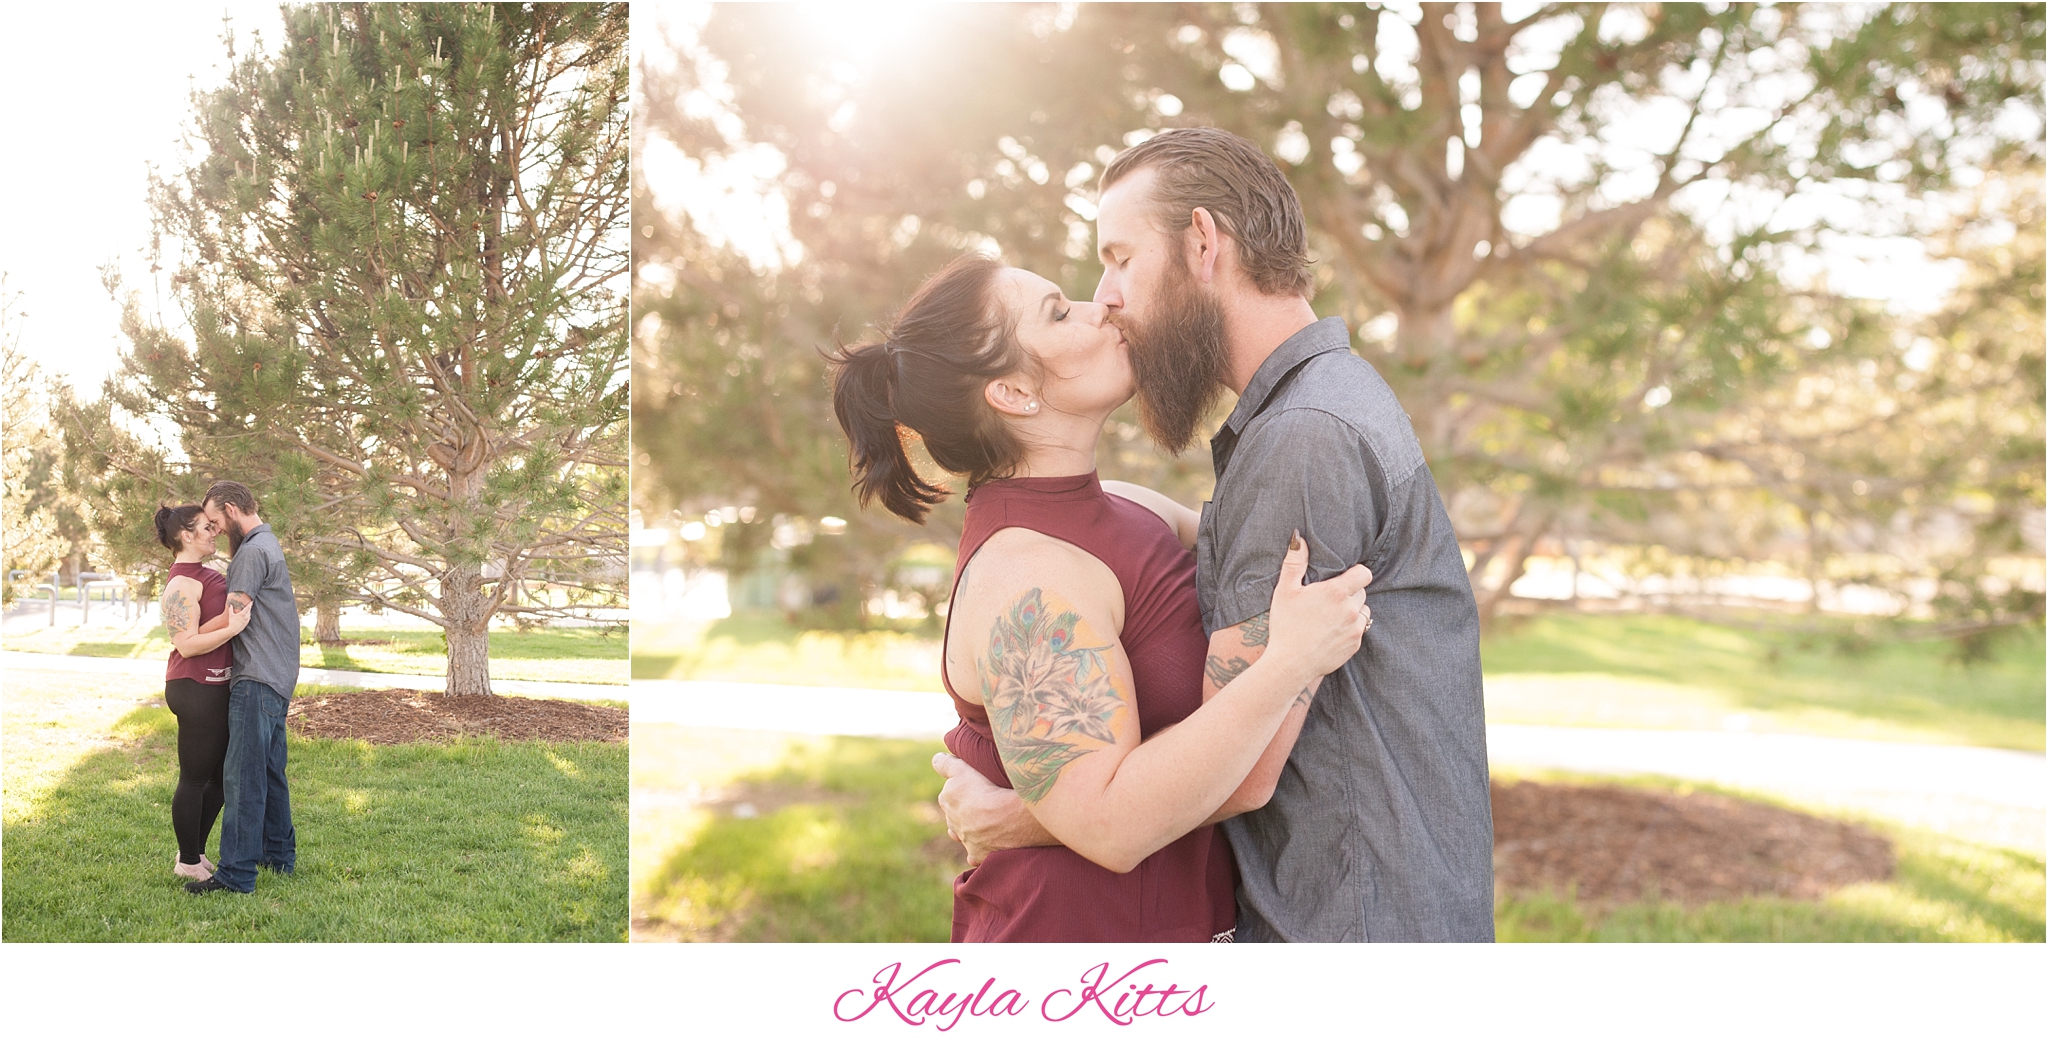 kayla kitts photography - albuquerque wedding photographer - albuquerque engagement photographer - nm wedding - albuquerque wedding - nm wedding - unm engagement - bosque engagement session_0012.jpg